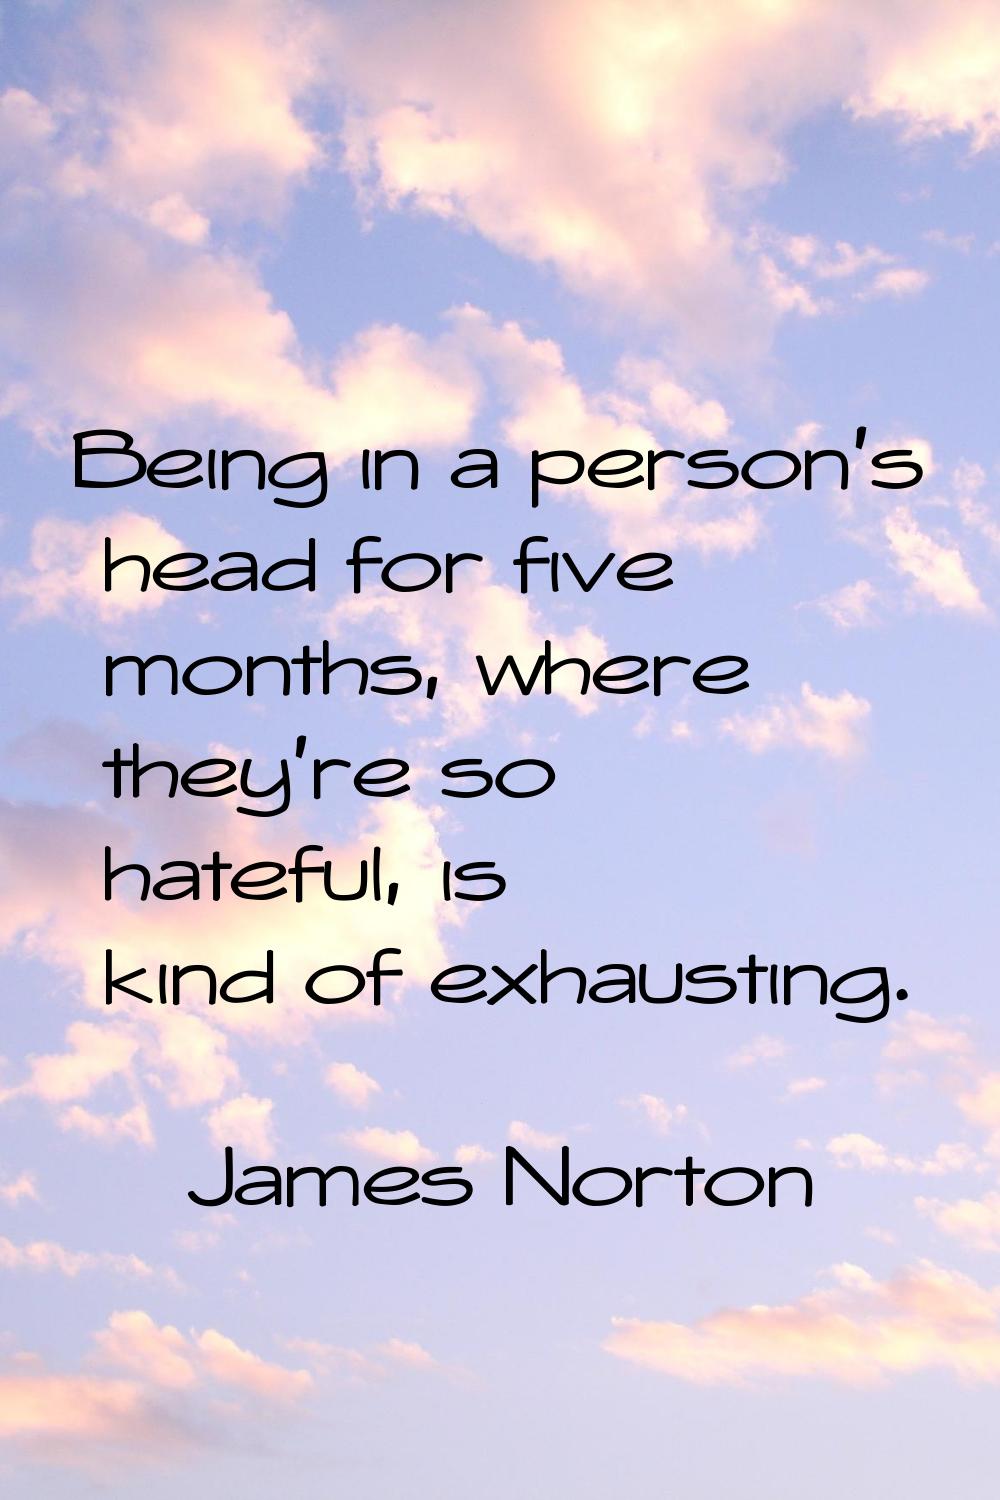 Being in a person's head for five months, where they're so hateful, is kind of exhausting.